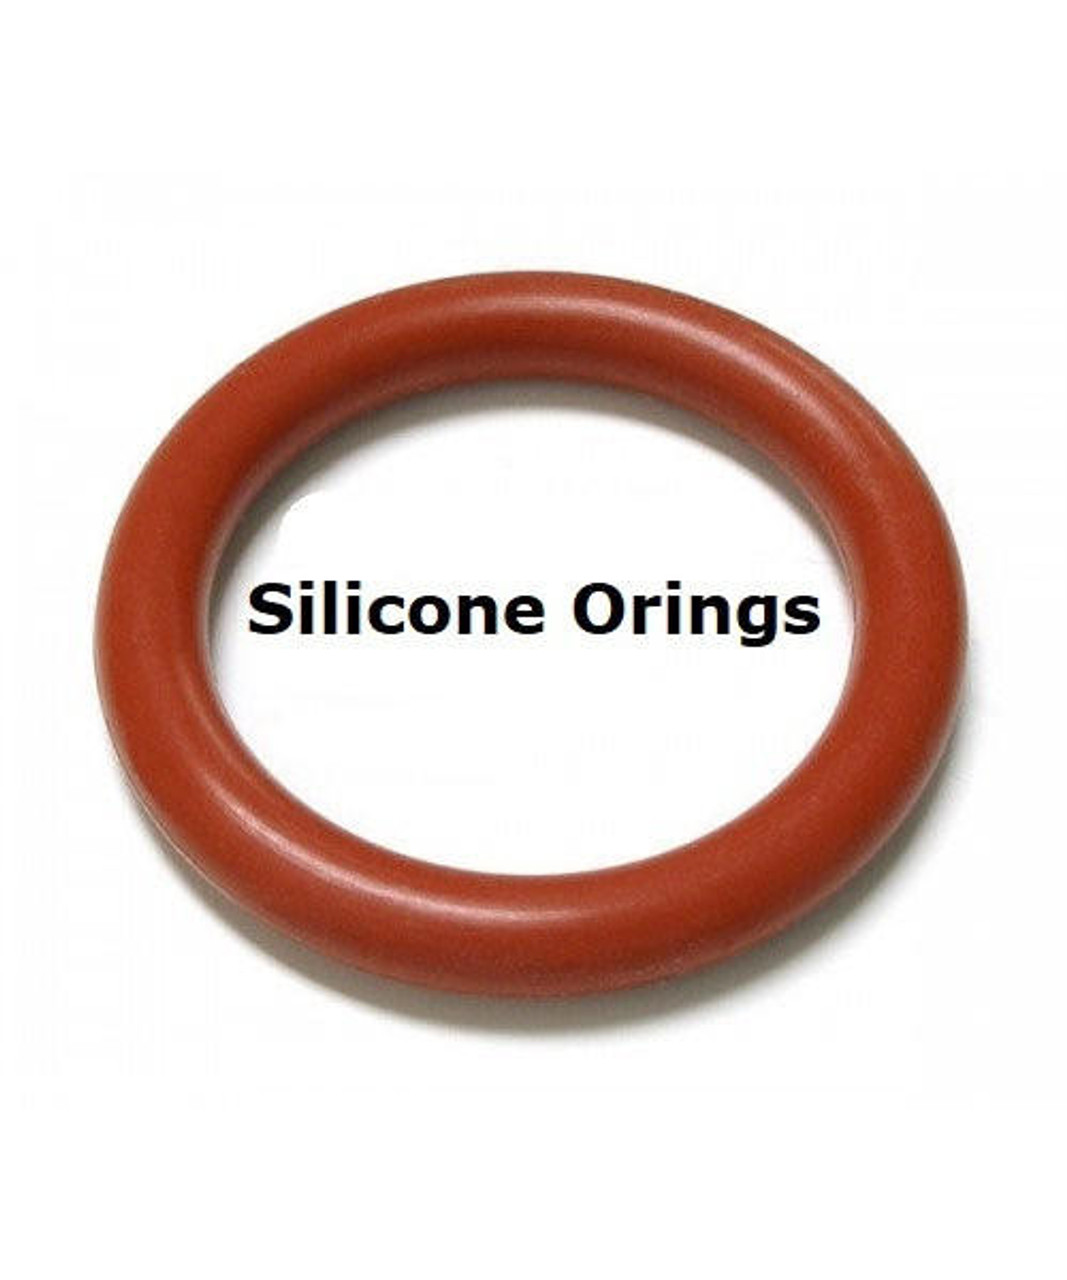 Silicone O-rings Size 365 Price for 1 pc